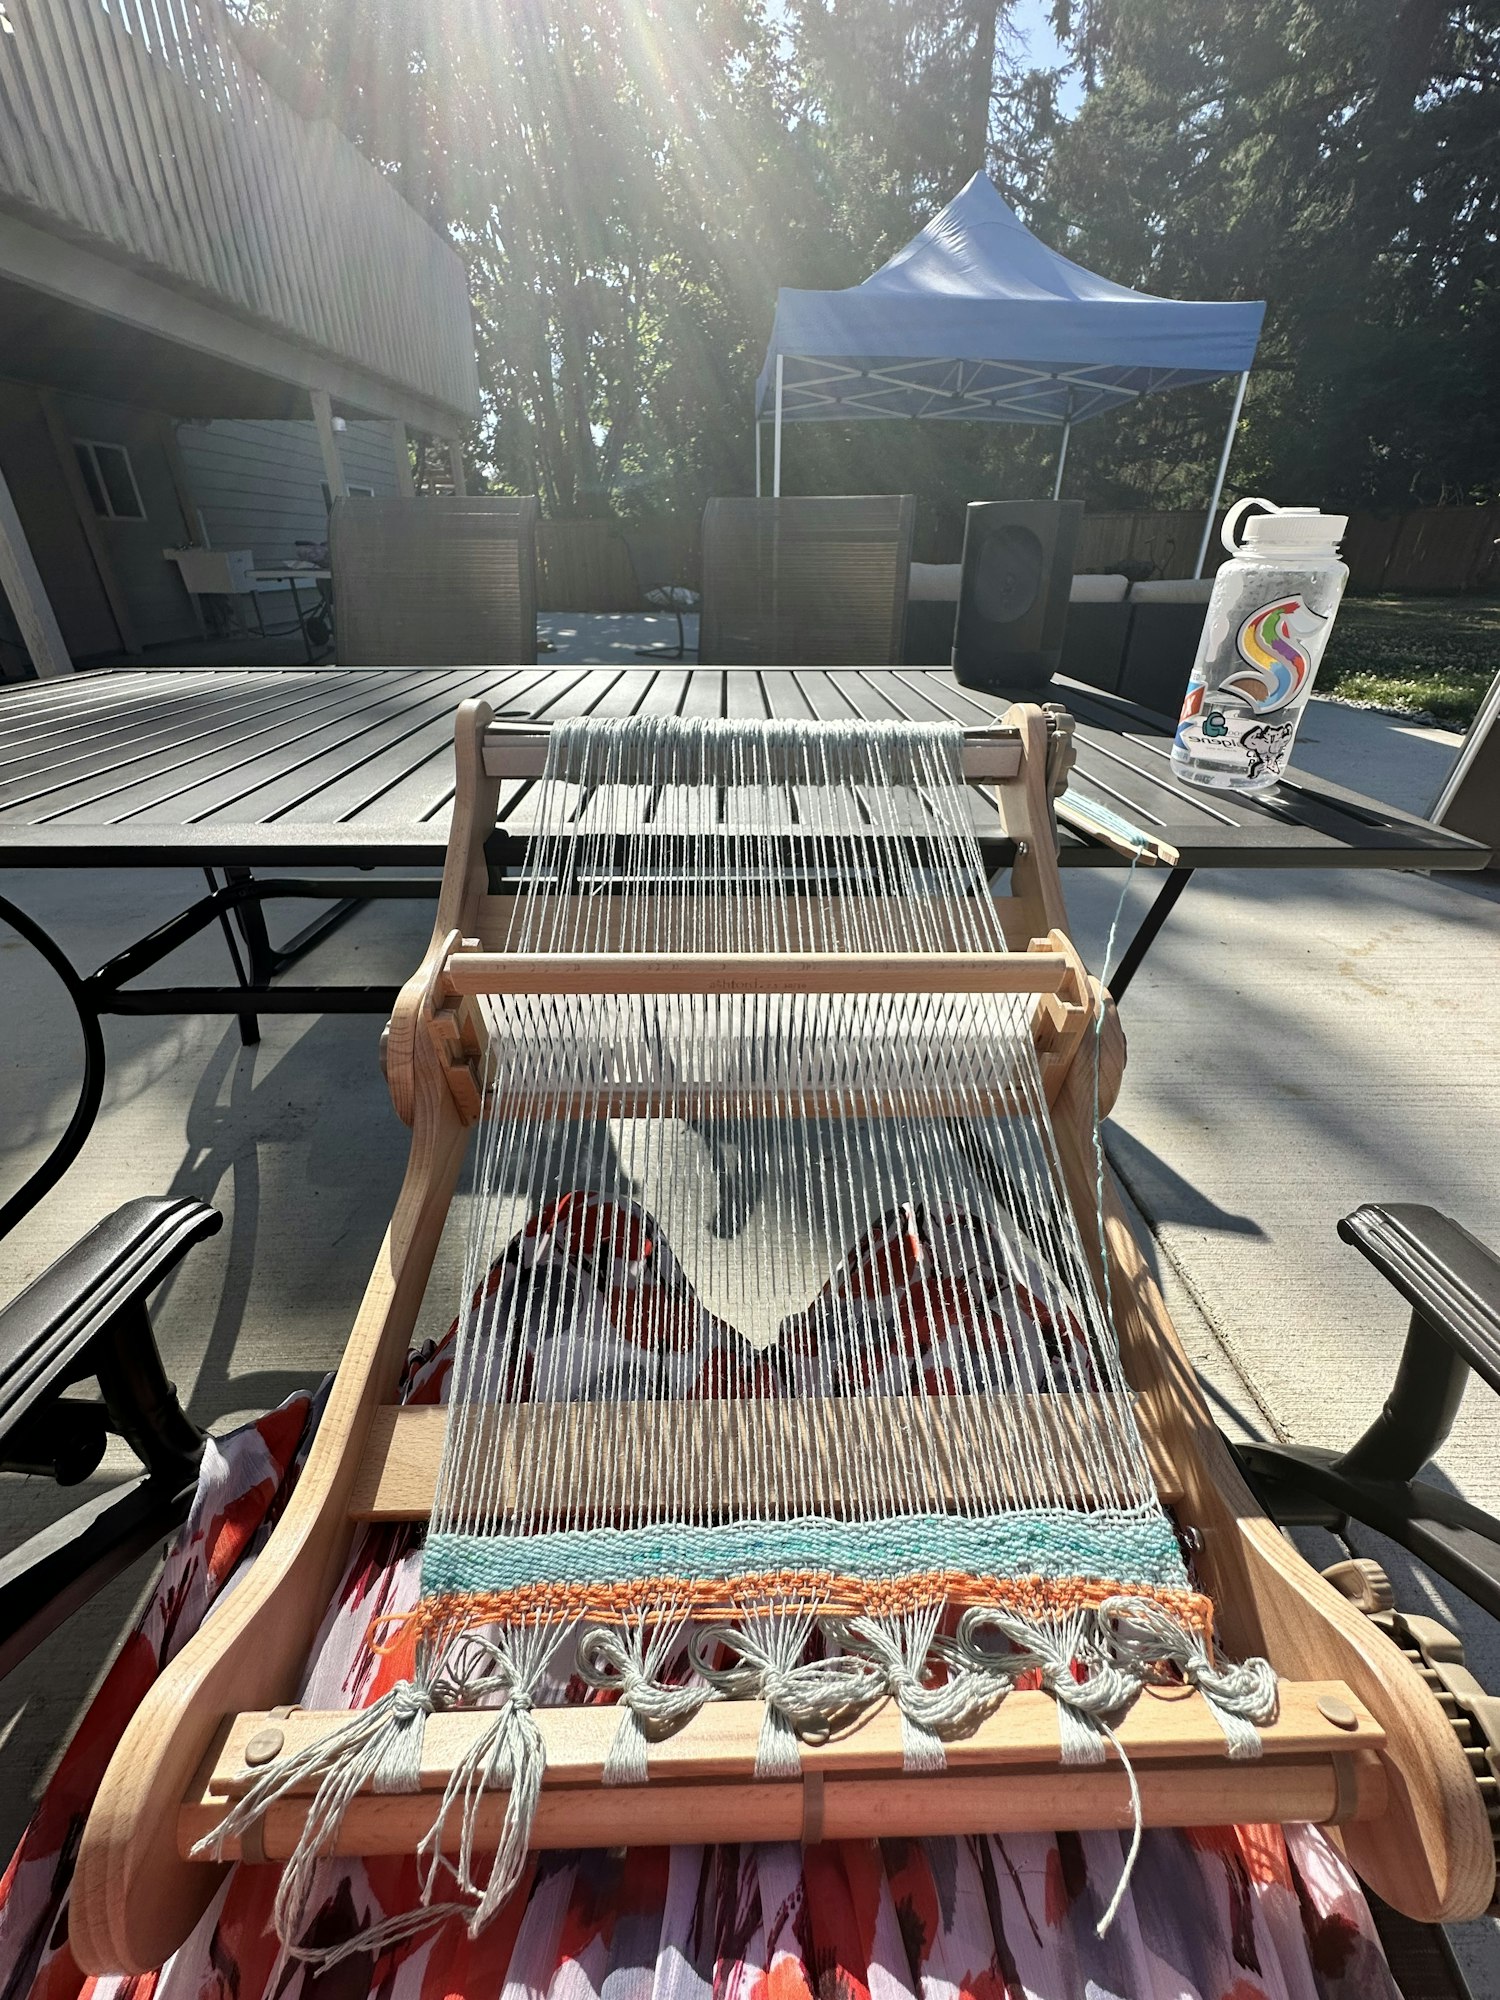 Arisa outside on a sunny day with her Ashford Knitter's Loom on her lap. There's green-blue weft yarn, gray-blue warp yarn, and orange scrap yarn.